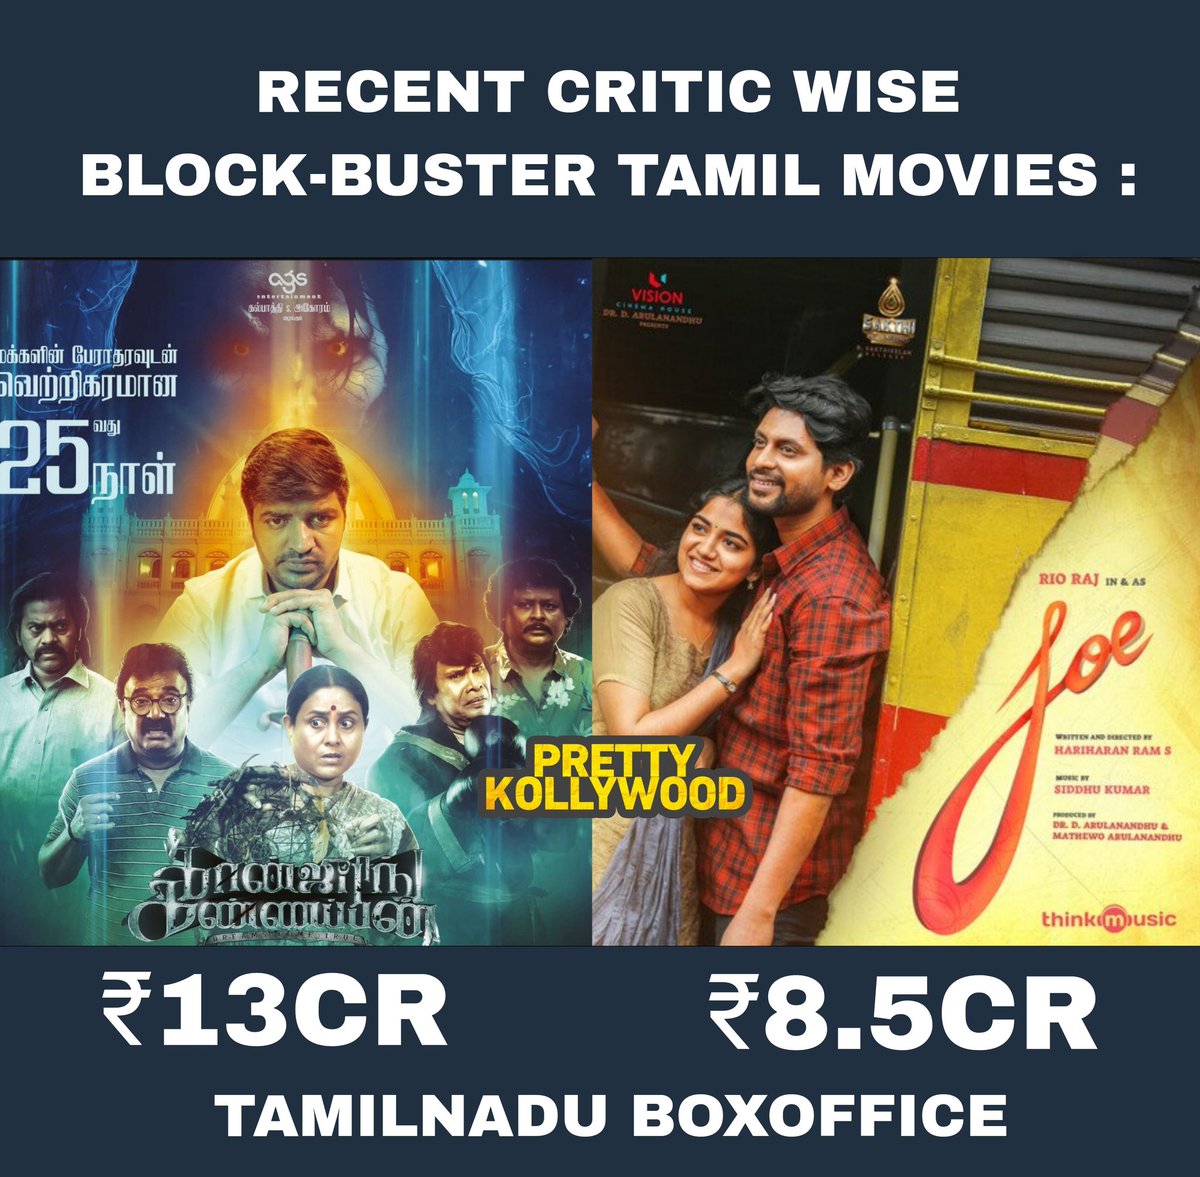 #Joe & #ConjuringKannappan performing well at Tamilnadu Box Office Collection & Critic wise super movie👌